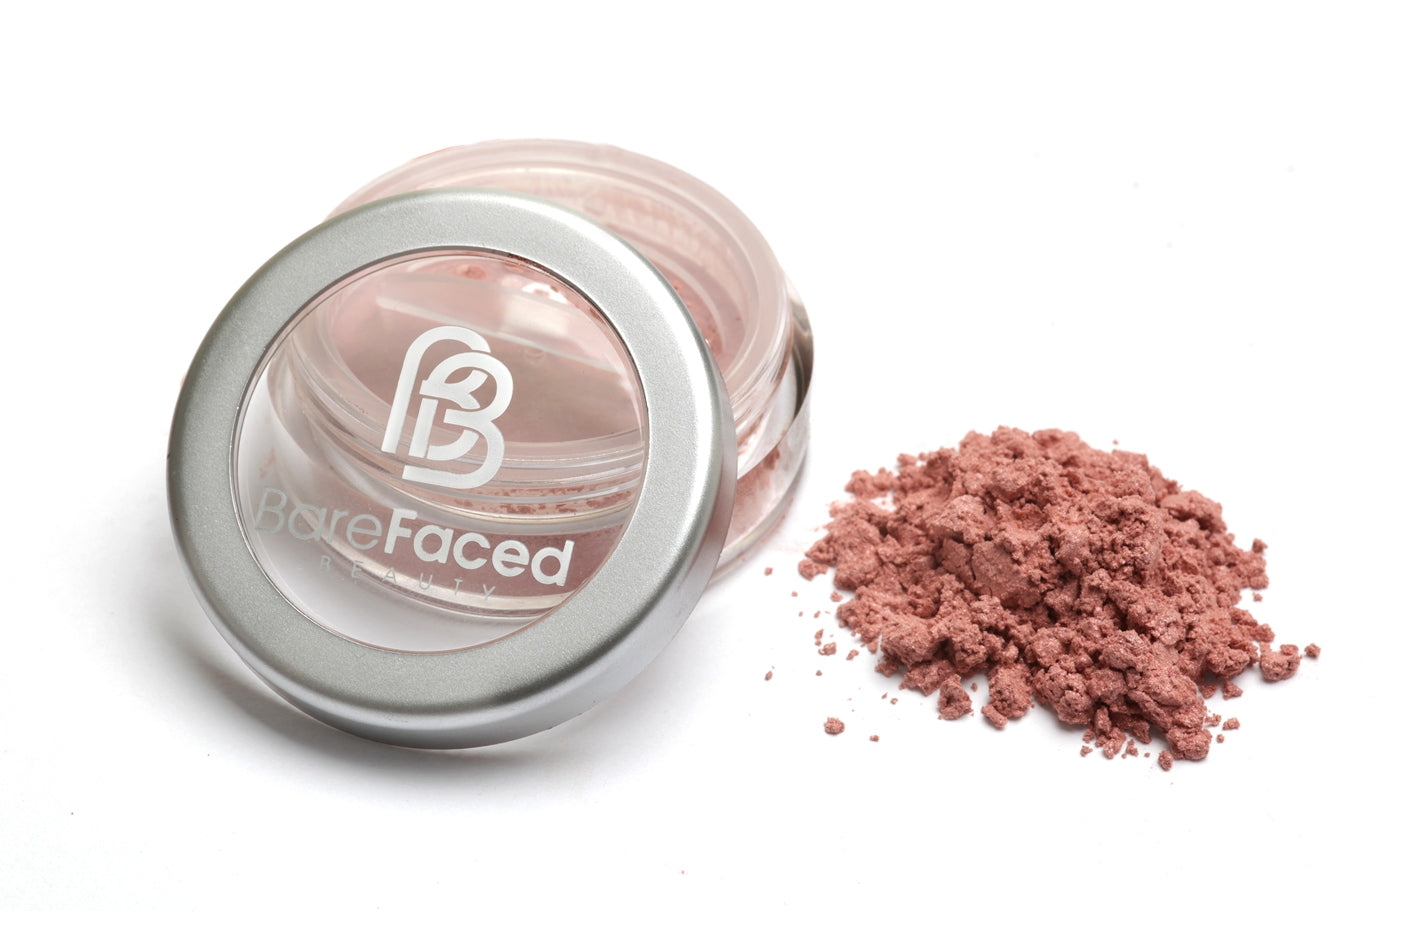 A small round pot of mineral blusher, with a swatch of the powder next to it showing a subtle satin, light peachy pink shade